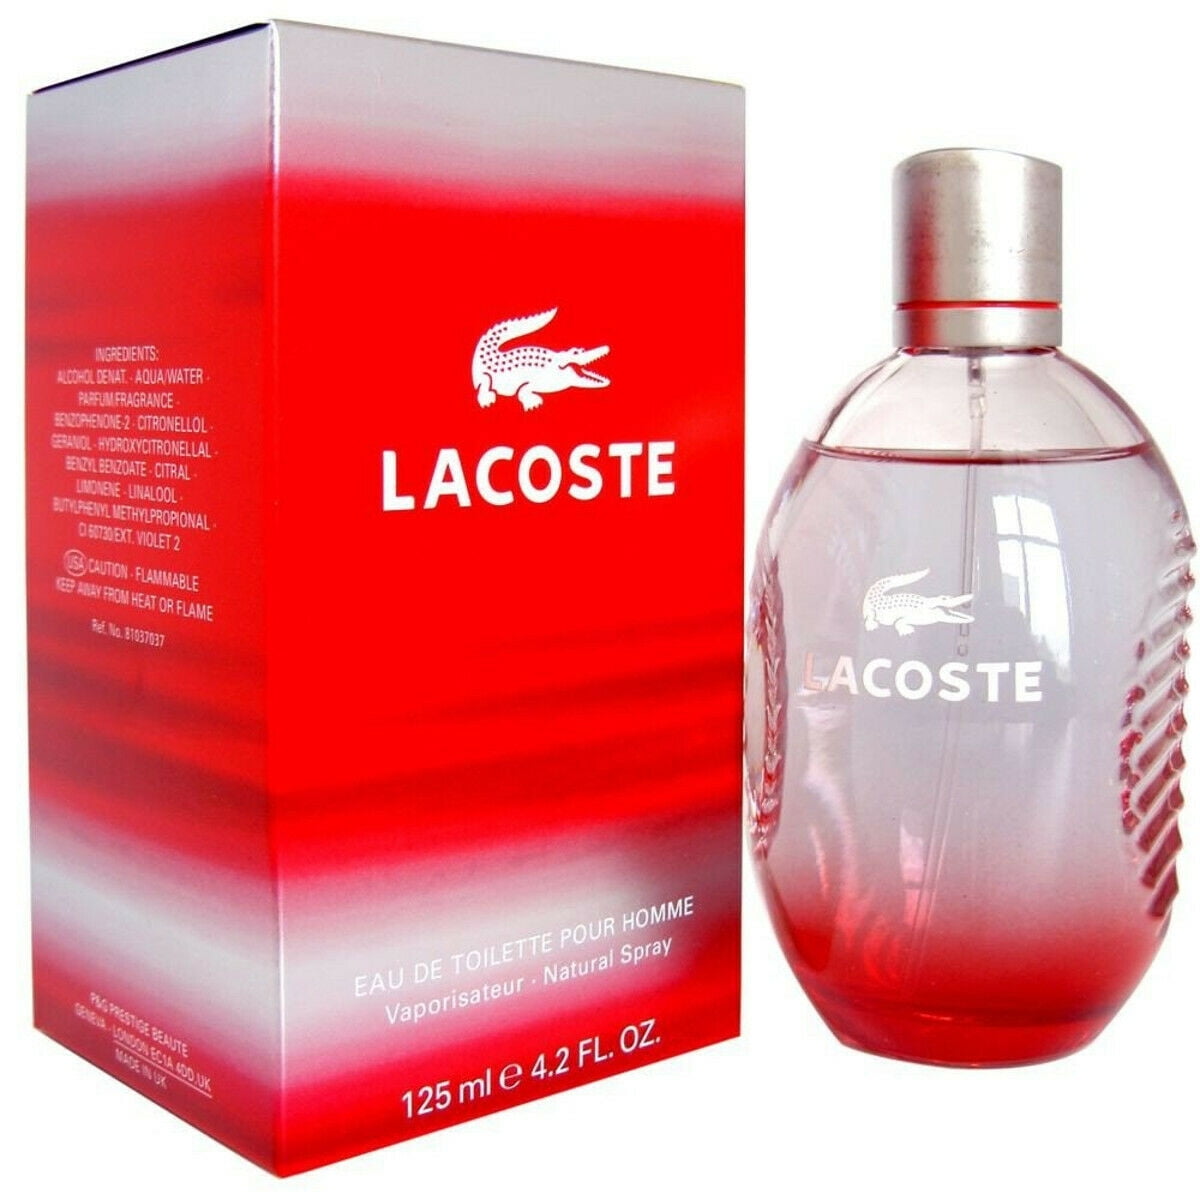 STYLE PLAY by LACOSTE RED cologne for men 4.2 oz New in Box - Walmart.com